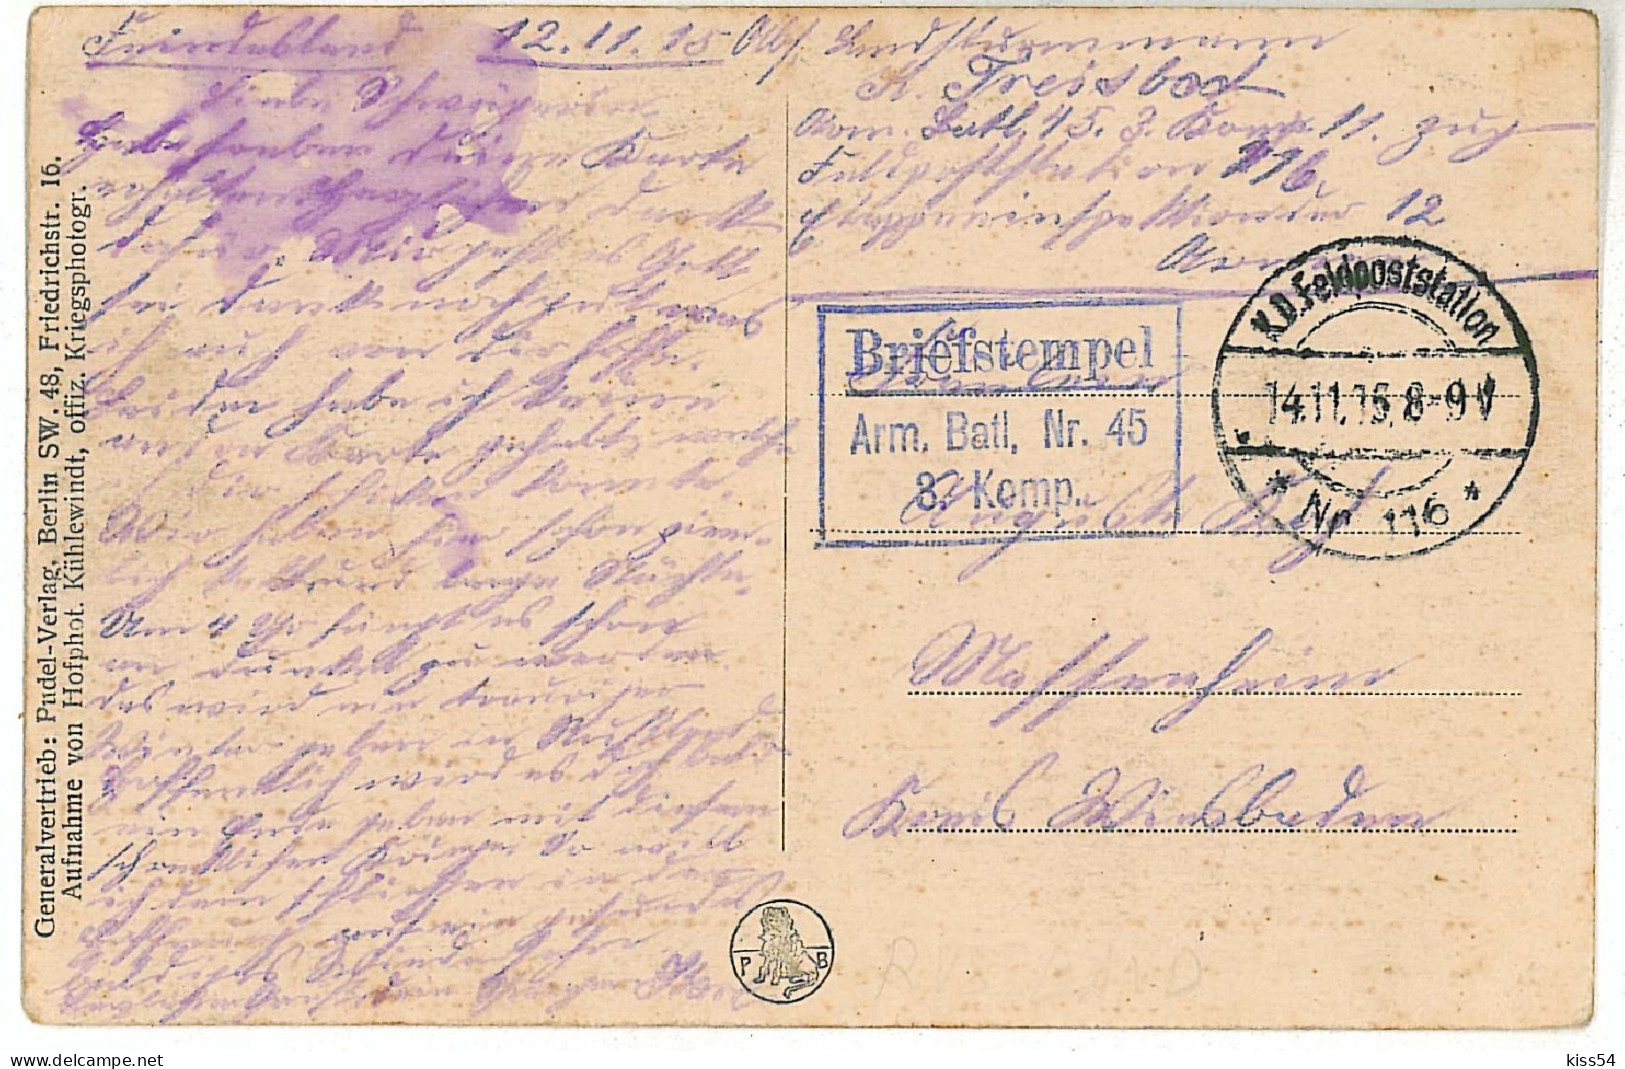 BL 12 - 6960  GRODNO, Belarus, The First Meeting German City Council - Old Postcard CENSOR - Used - 1915 - Wit-Rusland